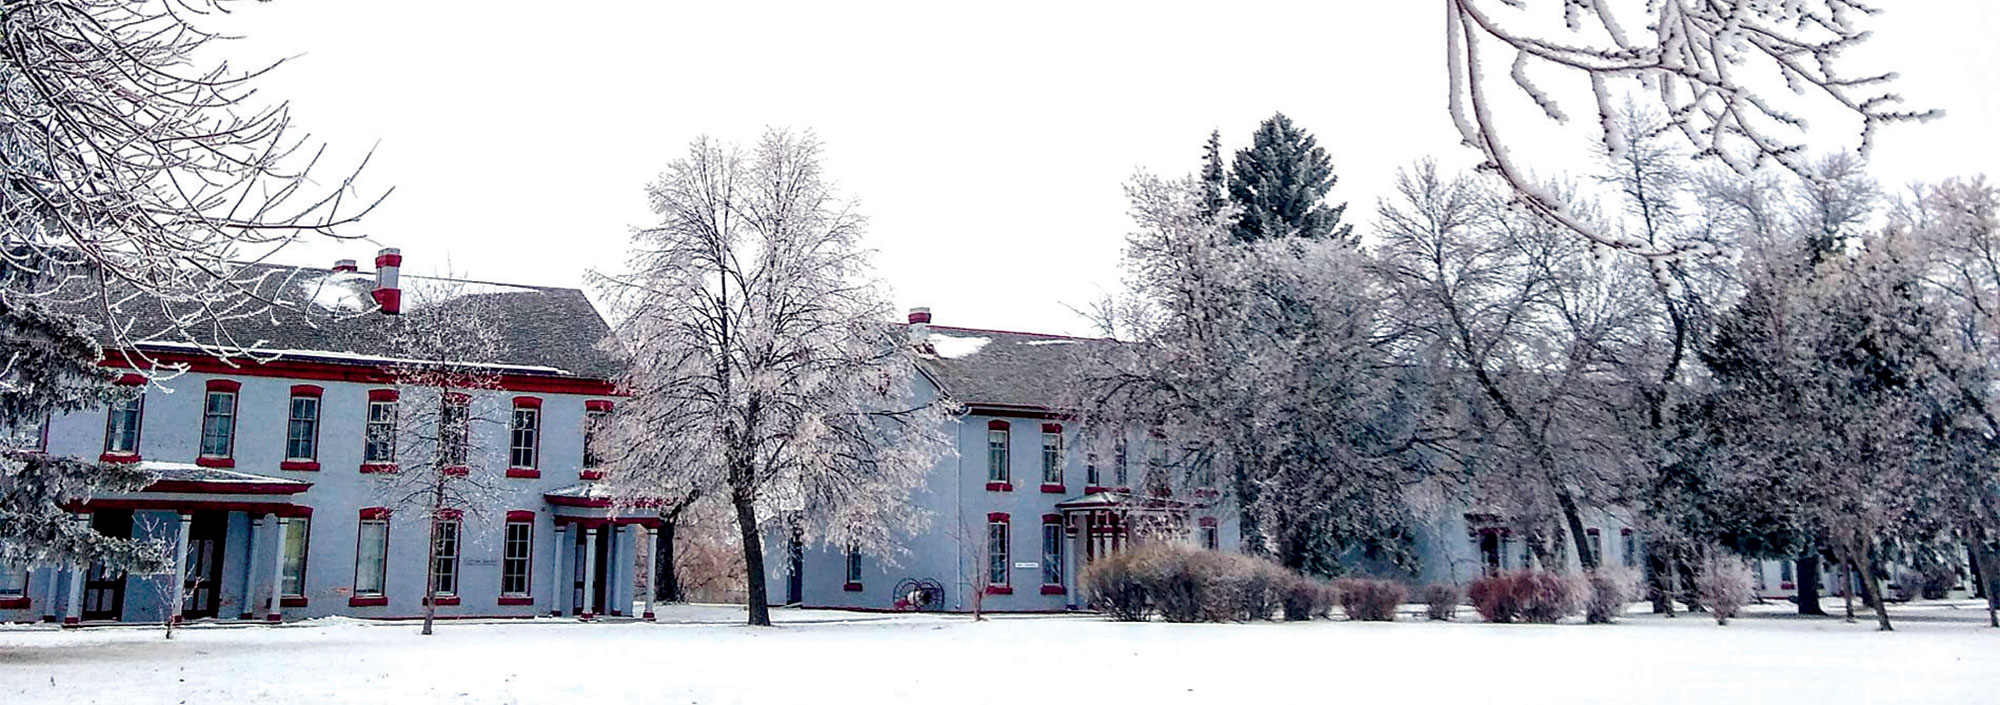 Old, white buildings with red trim are shown behind snowy trees.